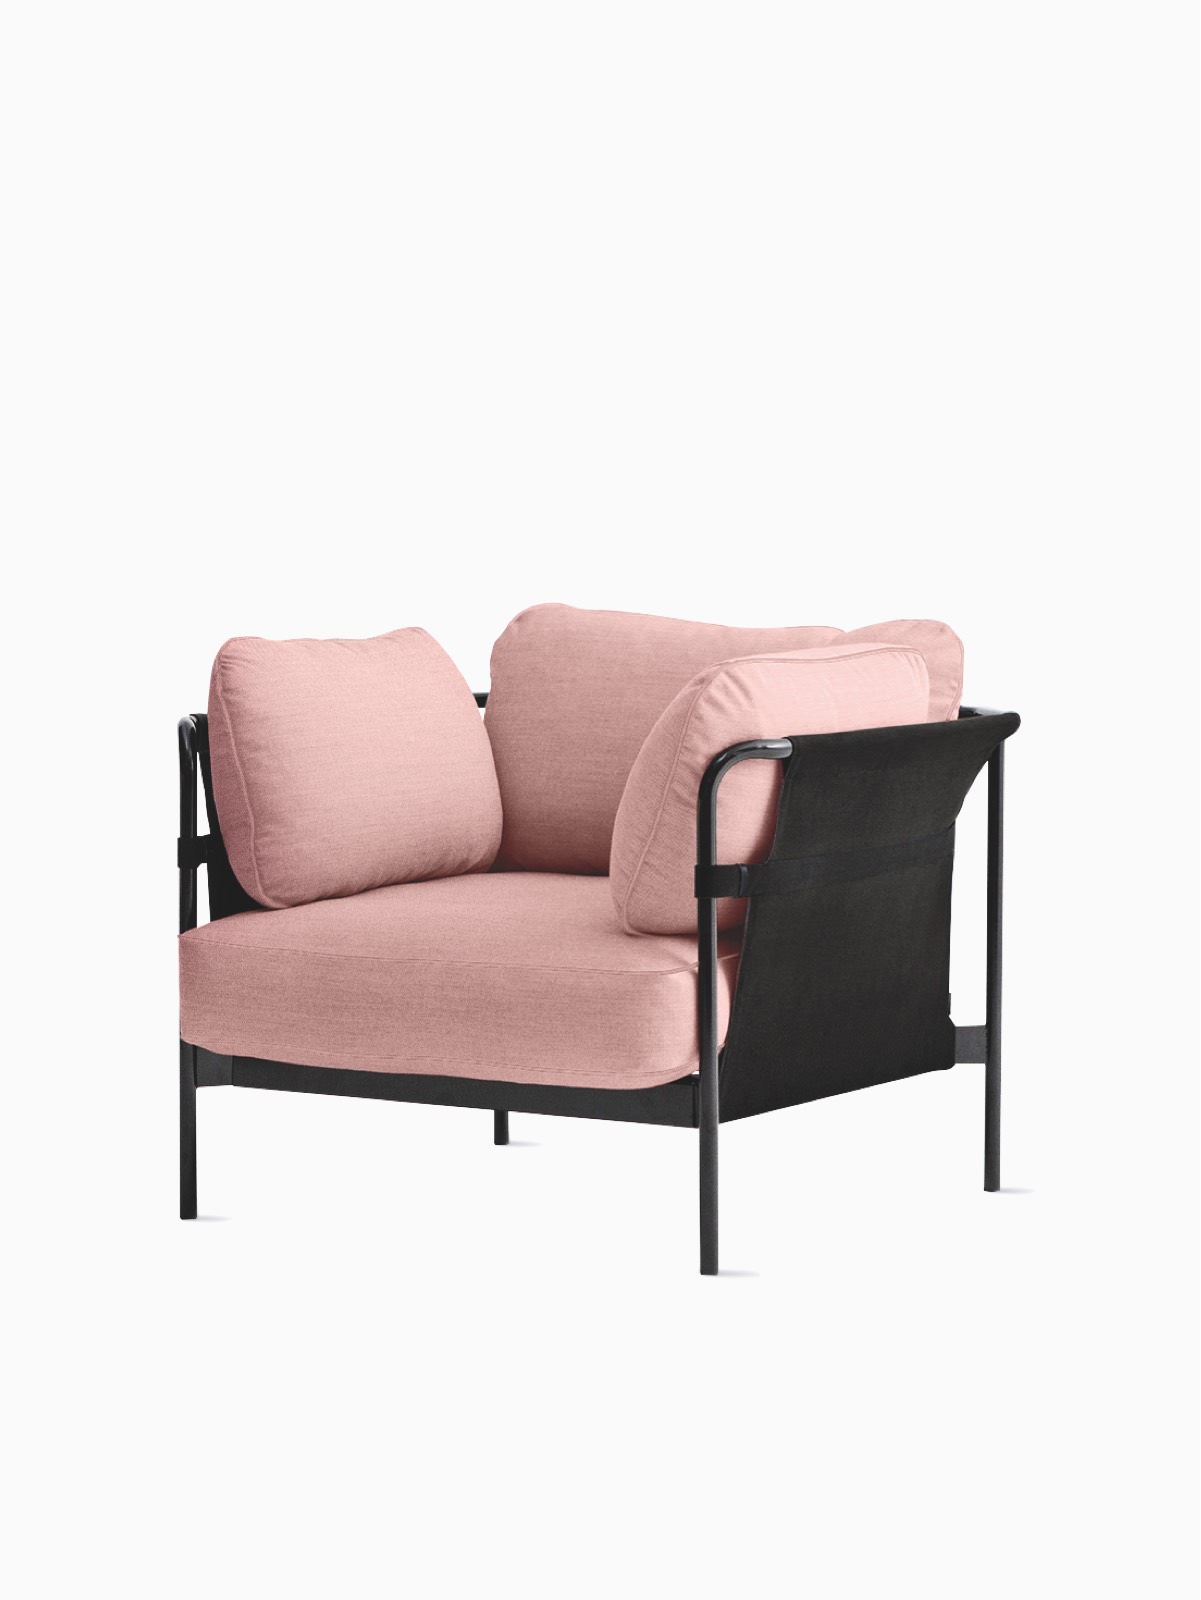 Lounge Chair Can